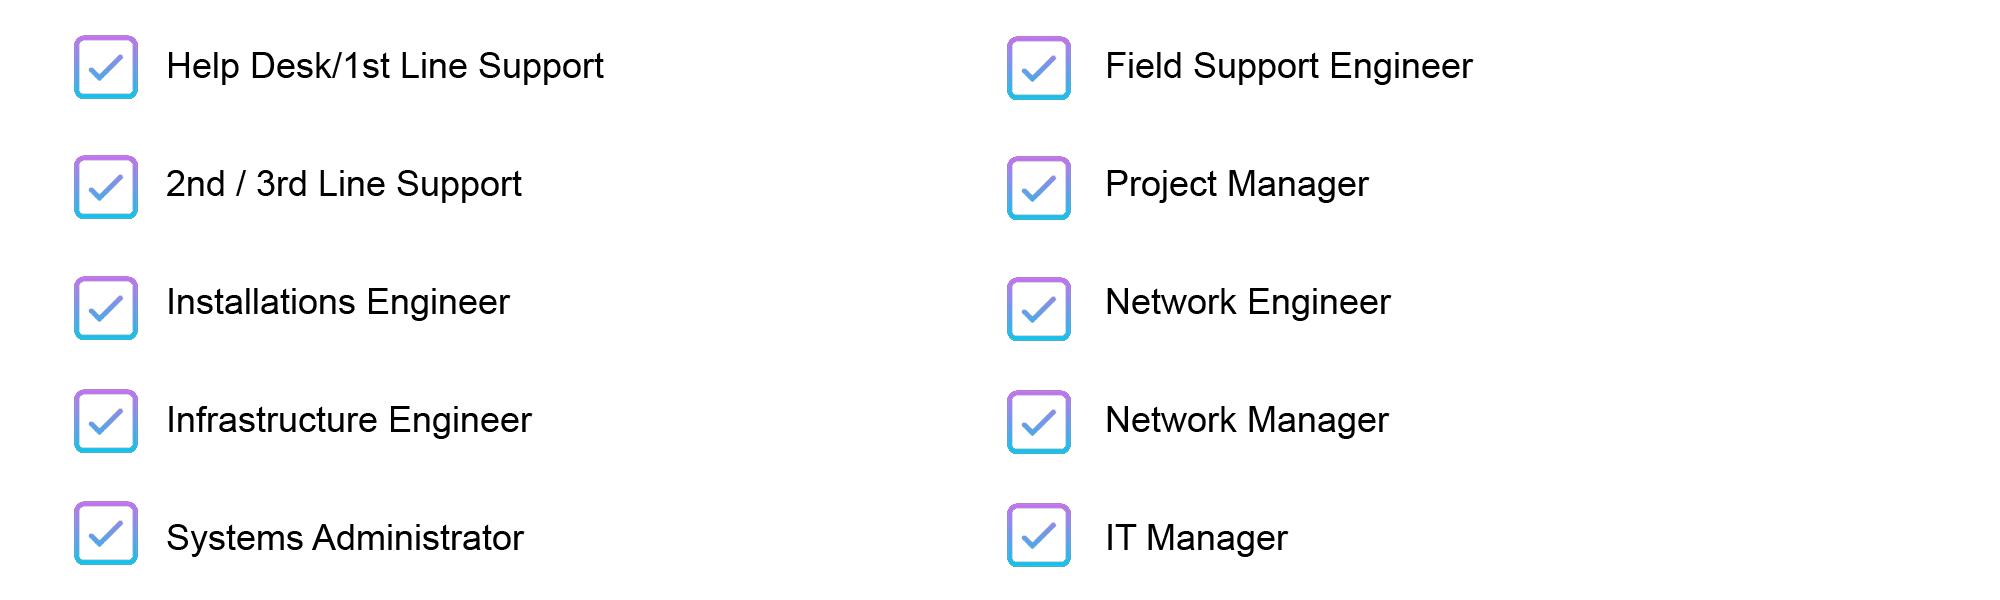 list of IT & telecoms roles including help desk/1st line support, 2nd/3rd line support, installations engineer, infrastructure engineer, systems administrator, field support engineer, project manager, network engineer, network manager and IT manager